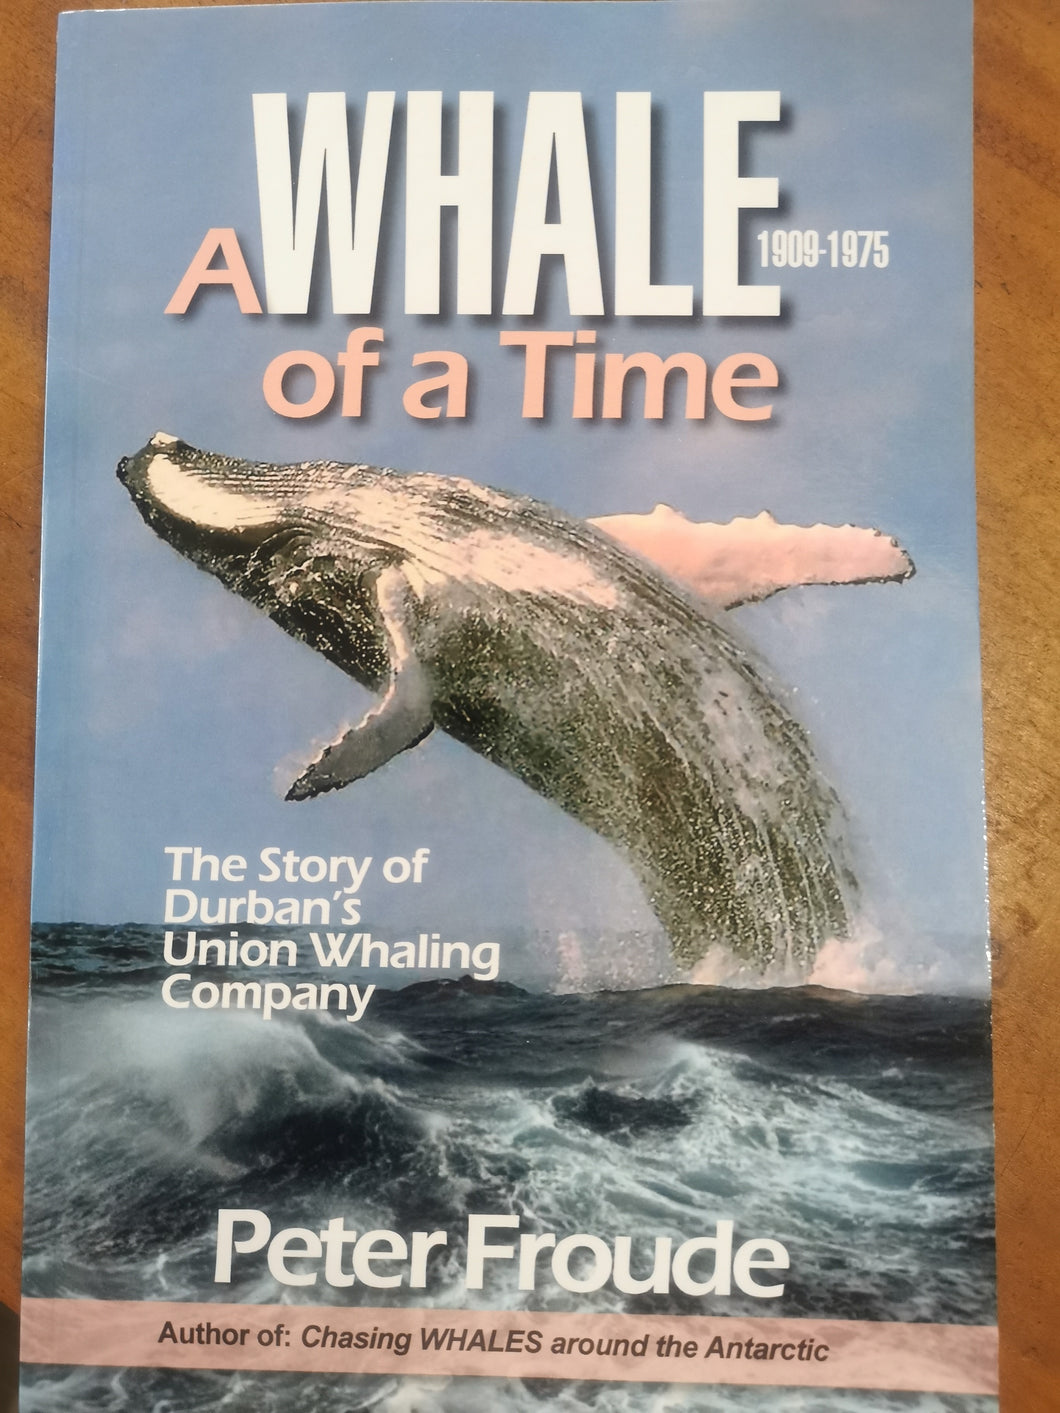 A Whale of a Time 1909-1975 - The Story of Durban's Union Whaling Company by Peter Froude